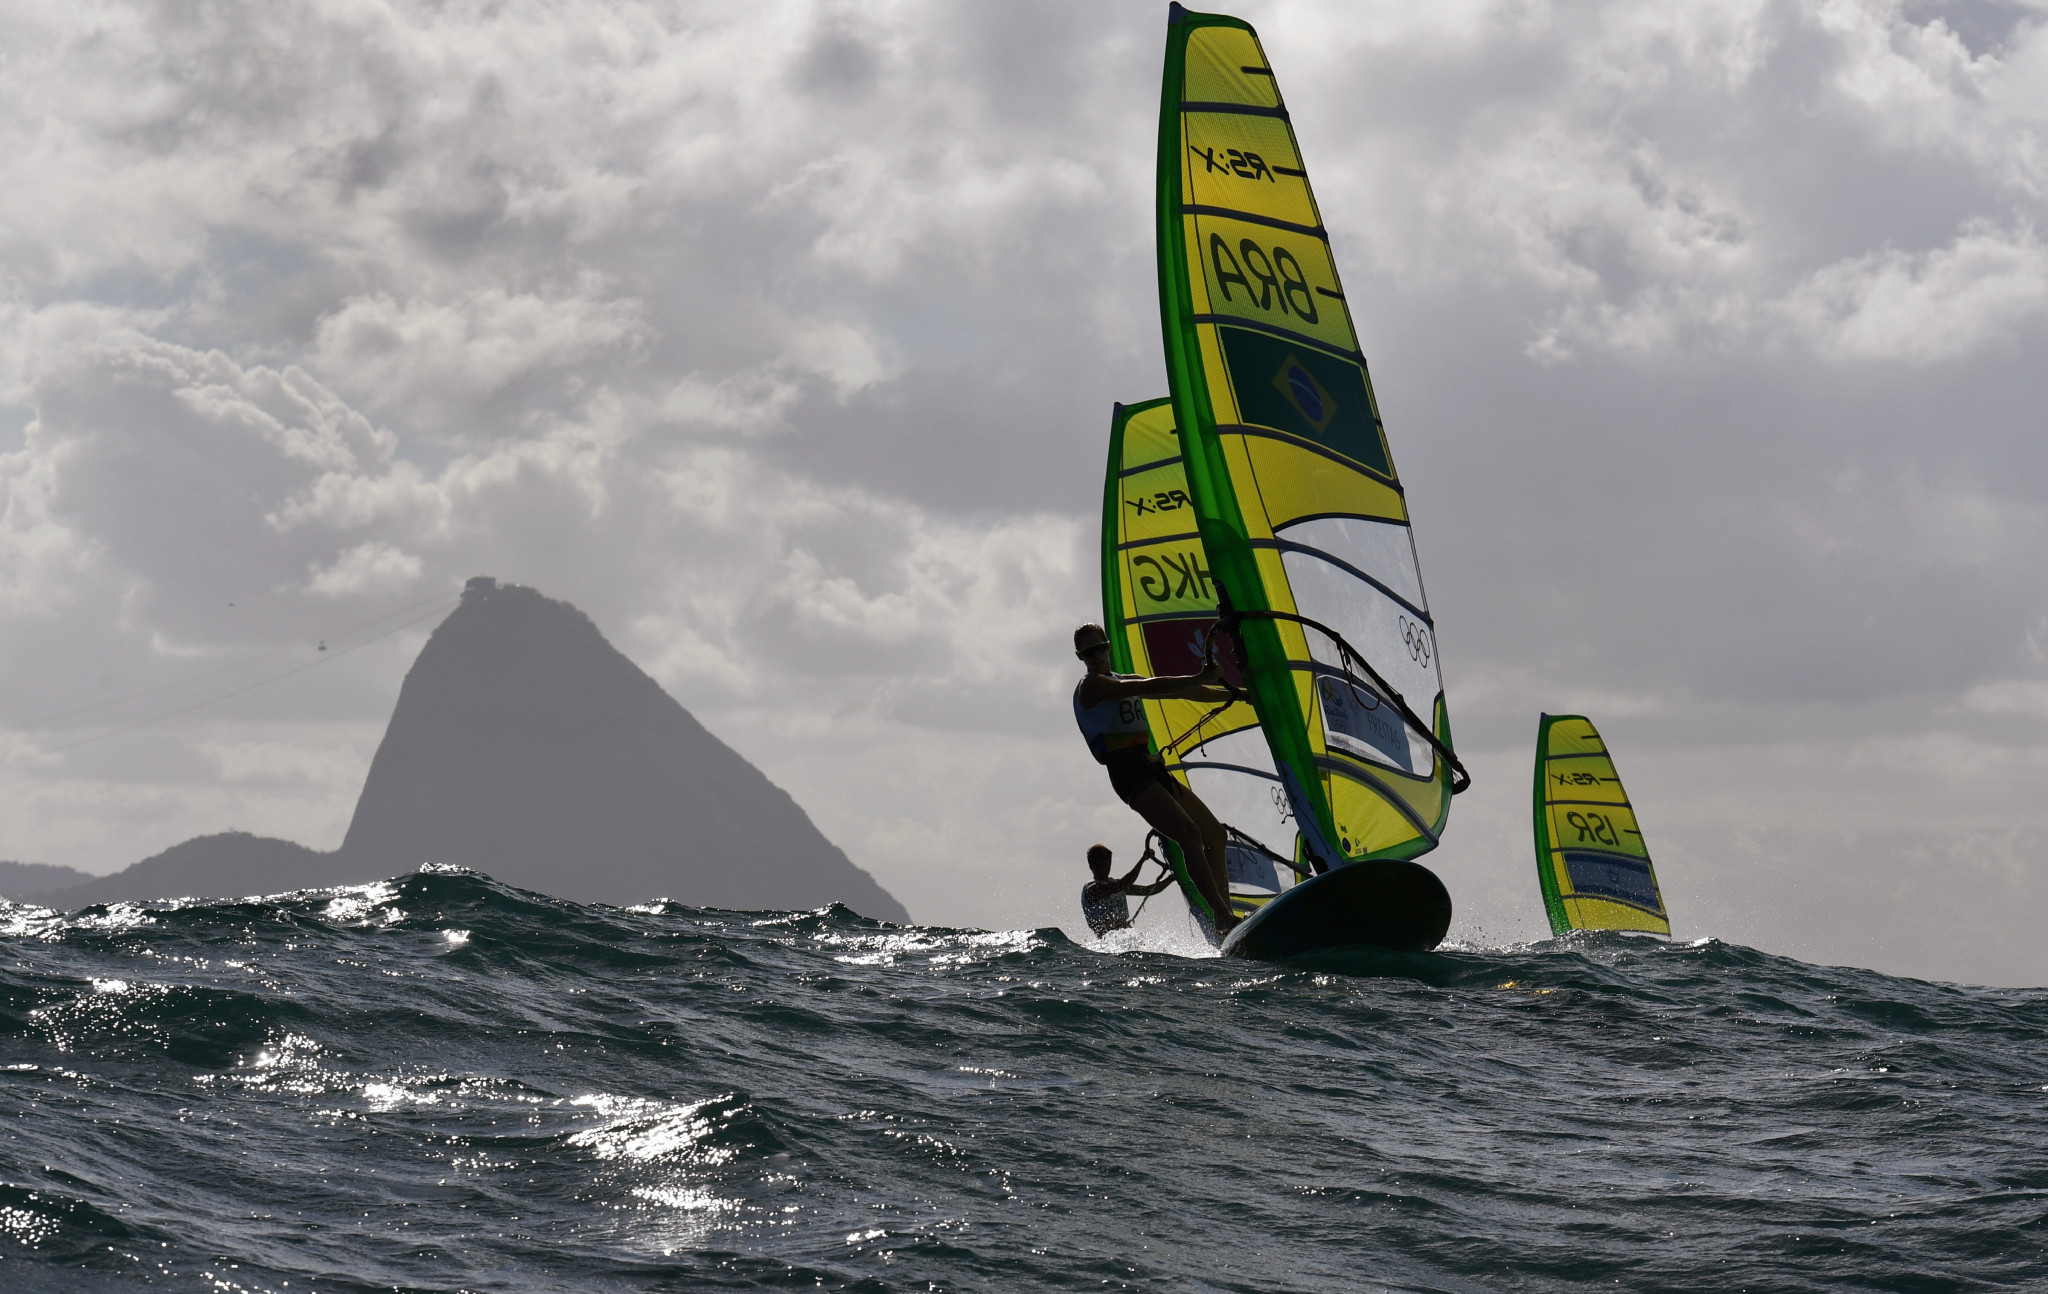 Concerns over RS:X windsurfing World Championships on Tokyo 2020 course intensify as cyclone hits Japan